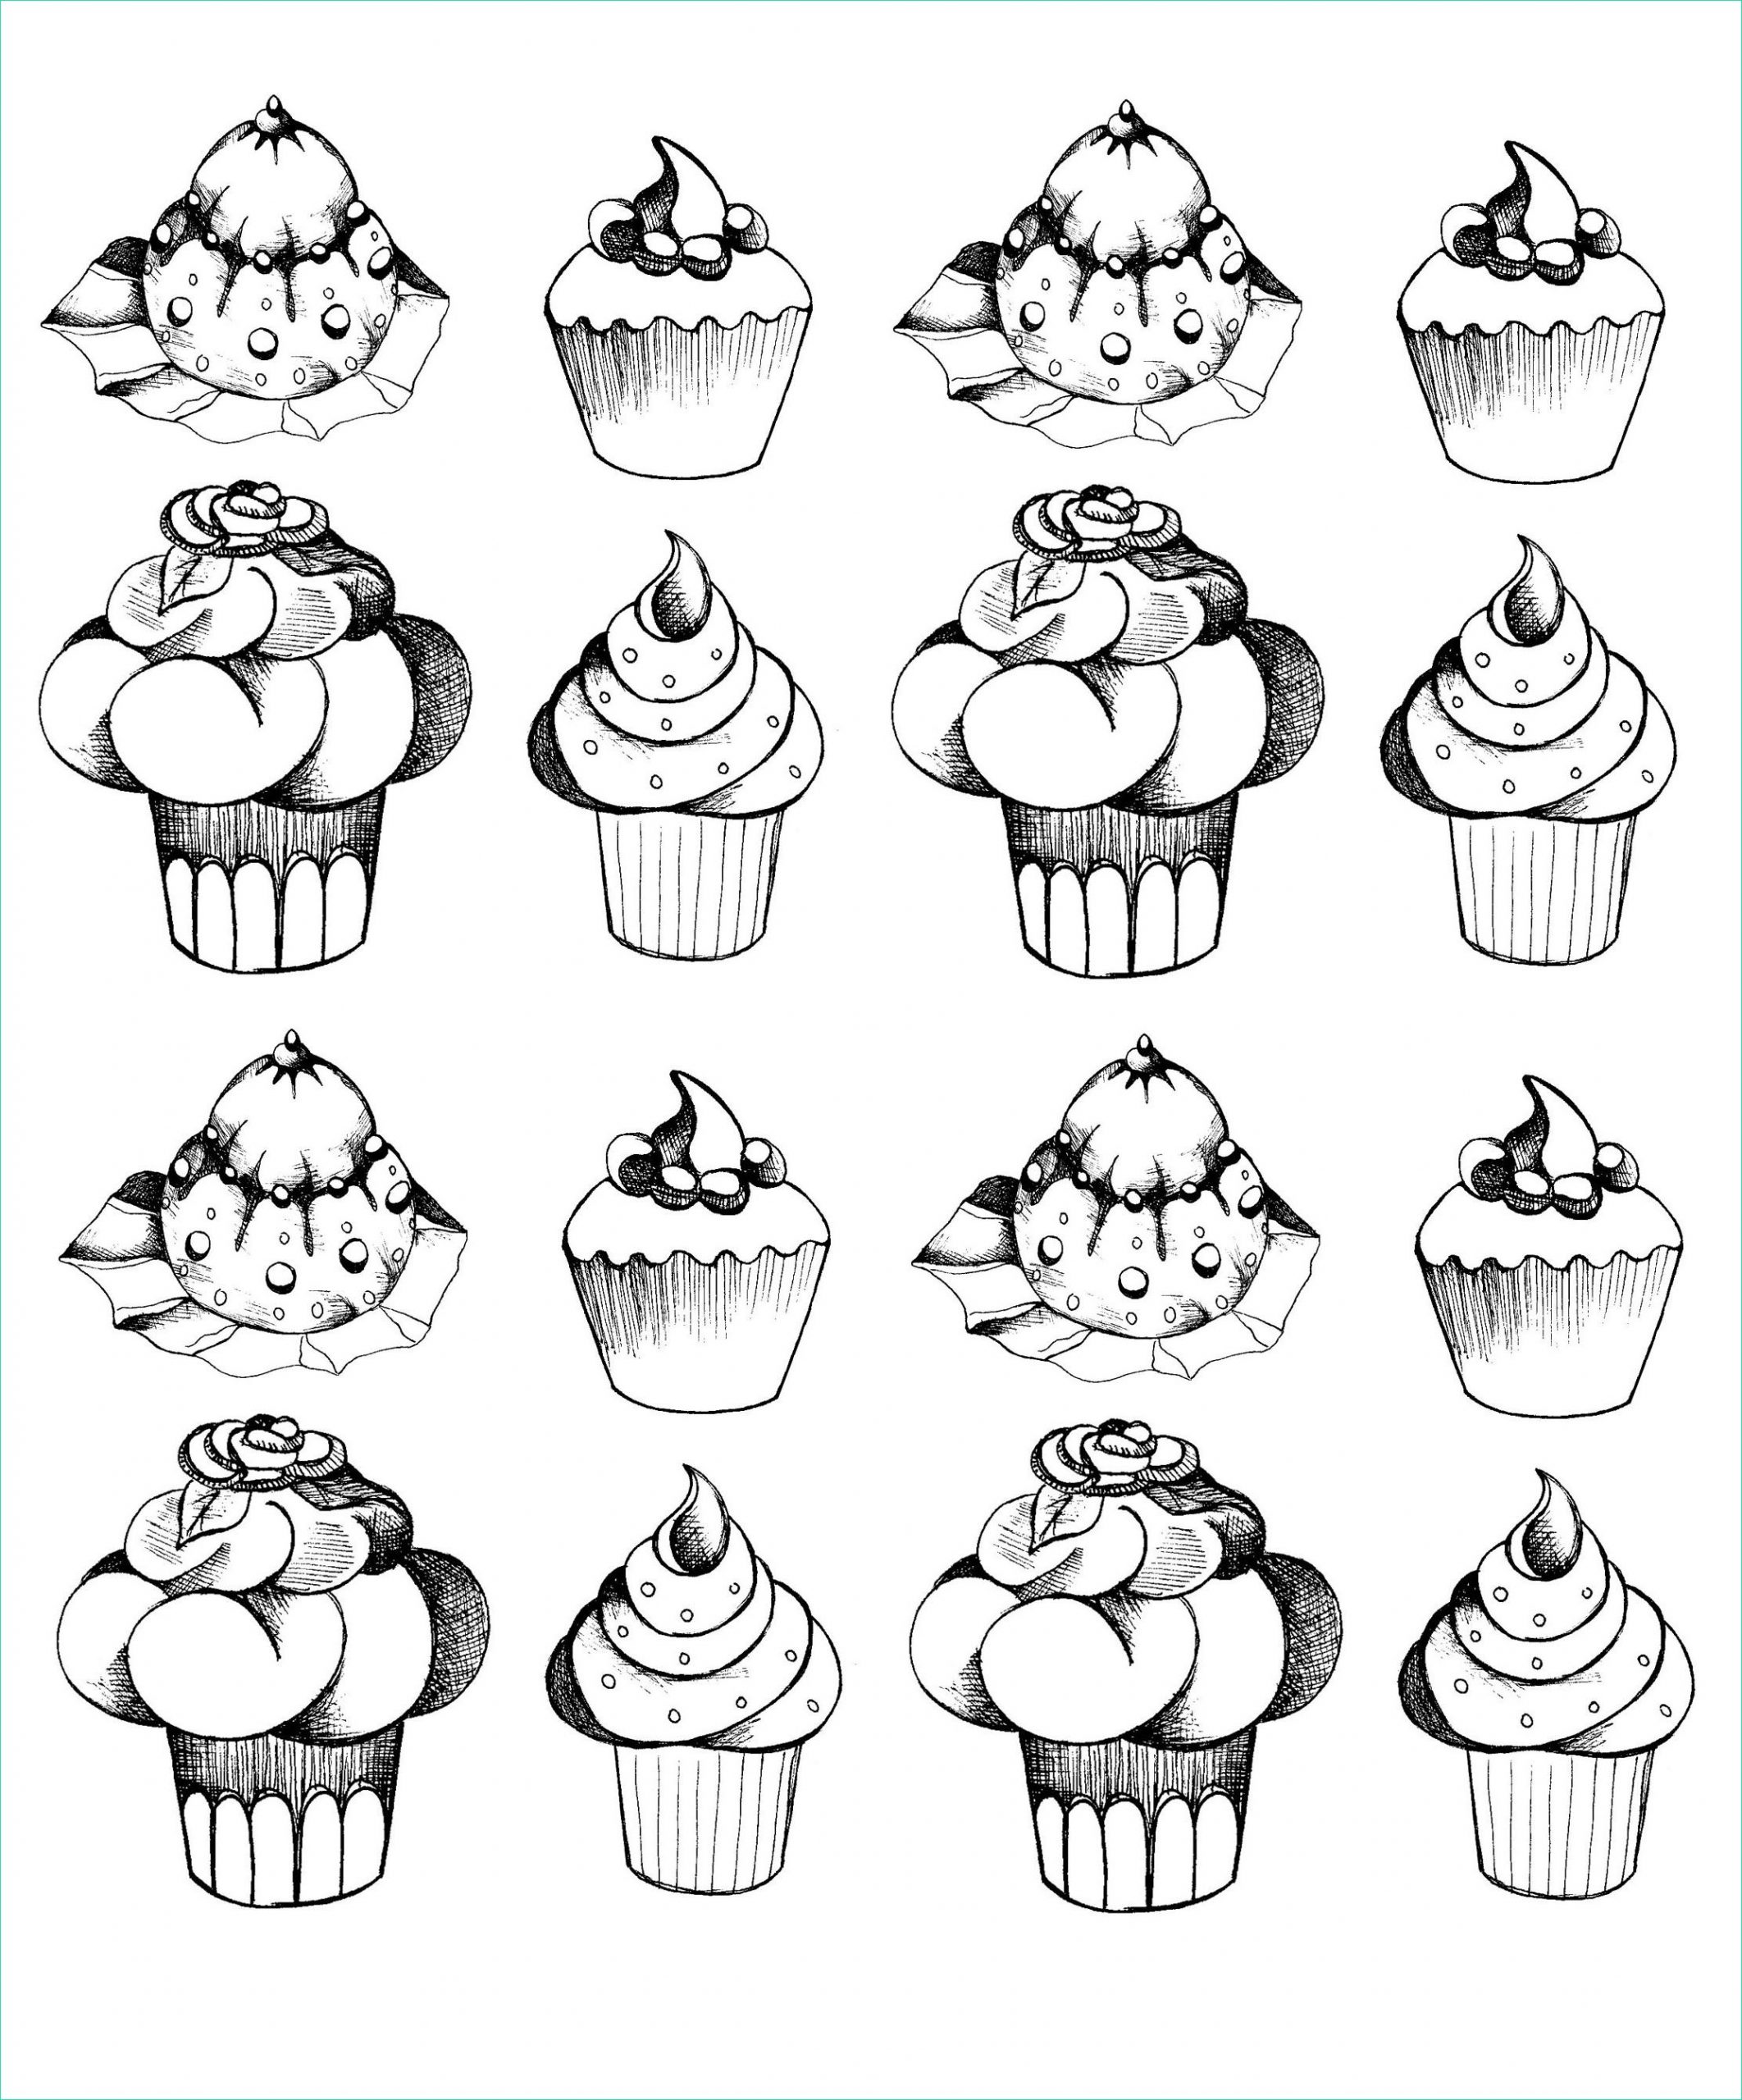 image=cup cakes coloring adult cupcakes oldstyle 1